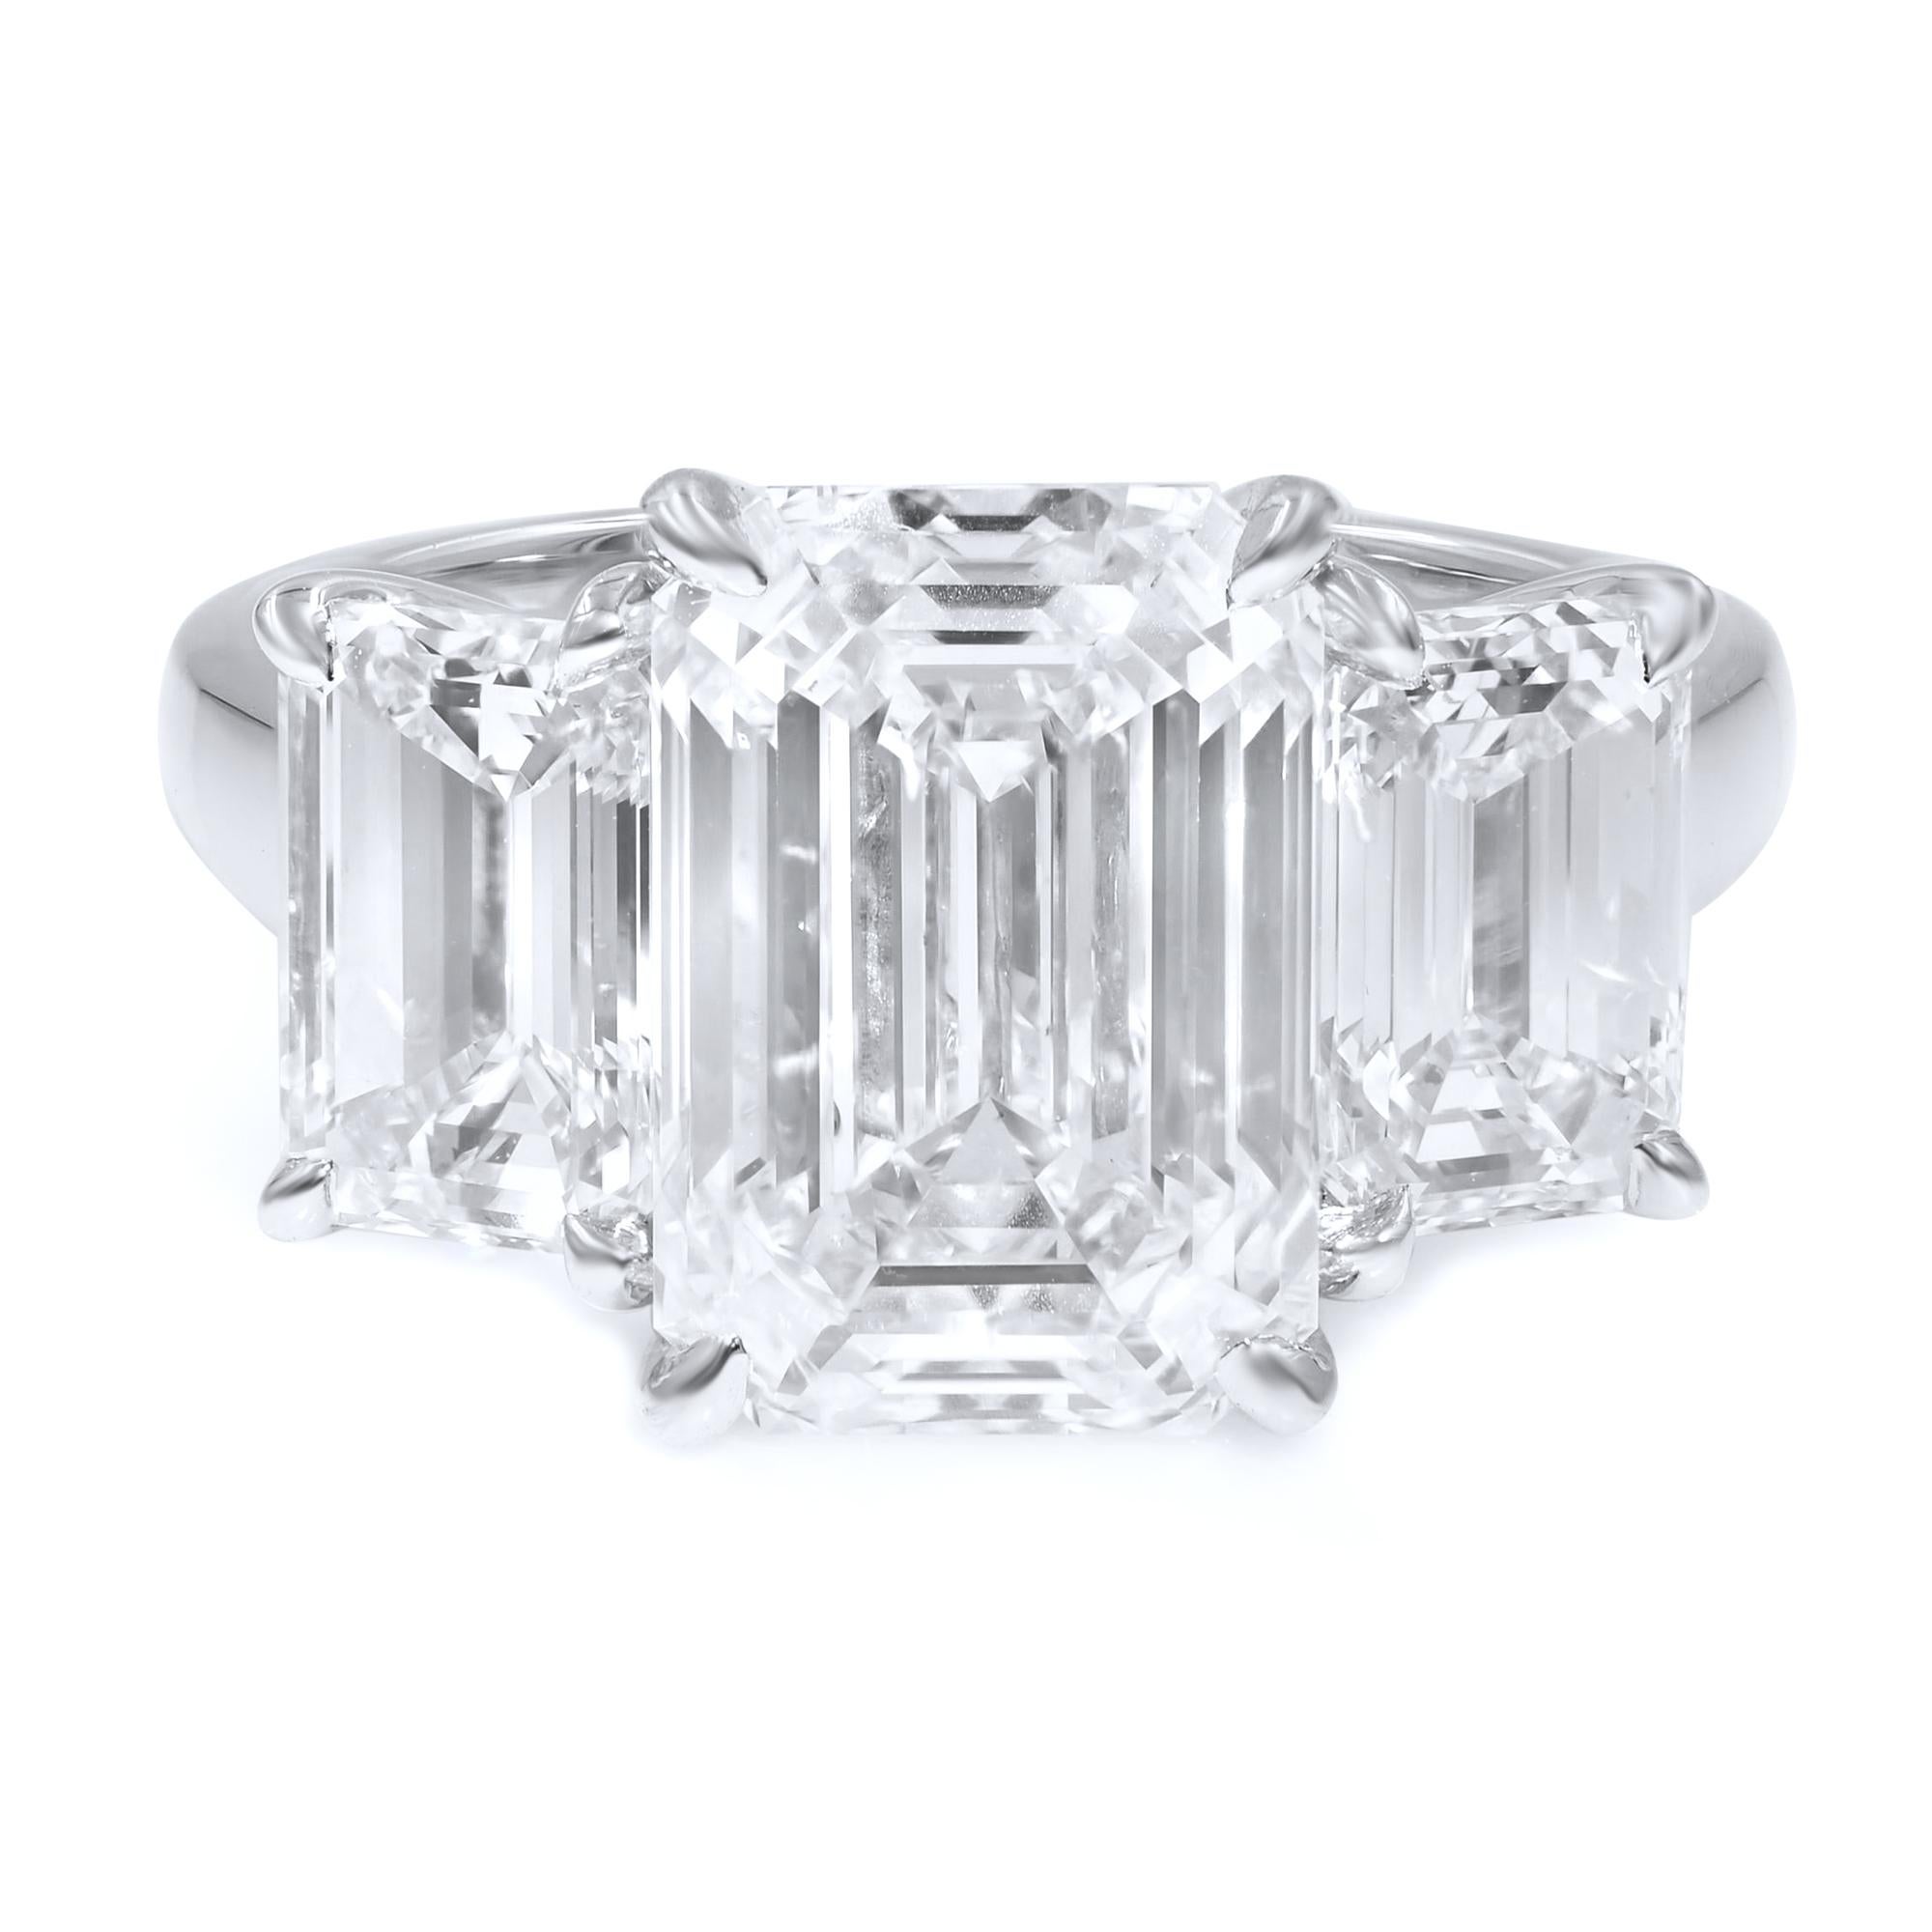 Three matching emerald cut stones create a stunning, but subtle, engagement piece. 

This ring is a custom piece, only made on order. Please allow 4-6 weeks for delivery. Variations are available using different stones or metal, please contact us